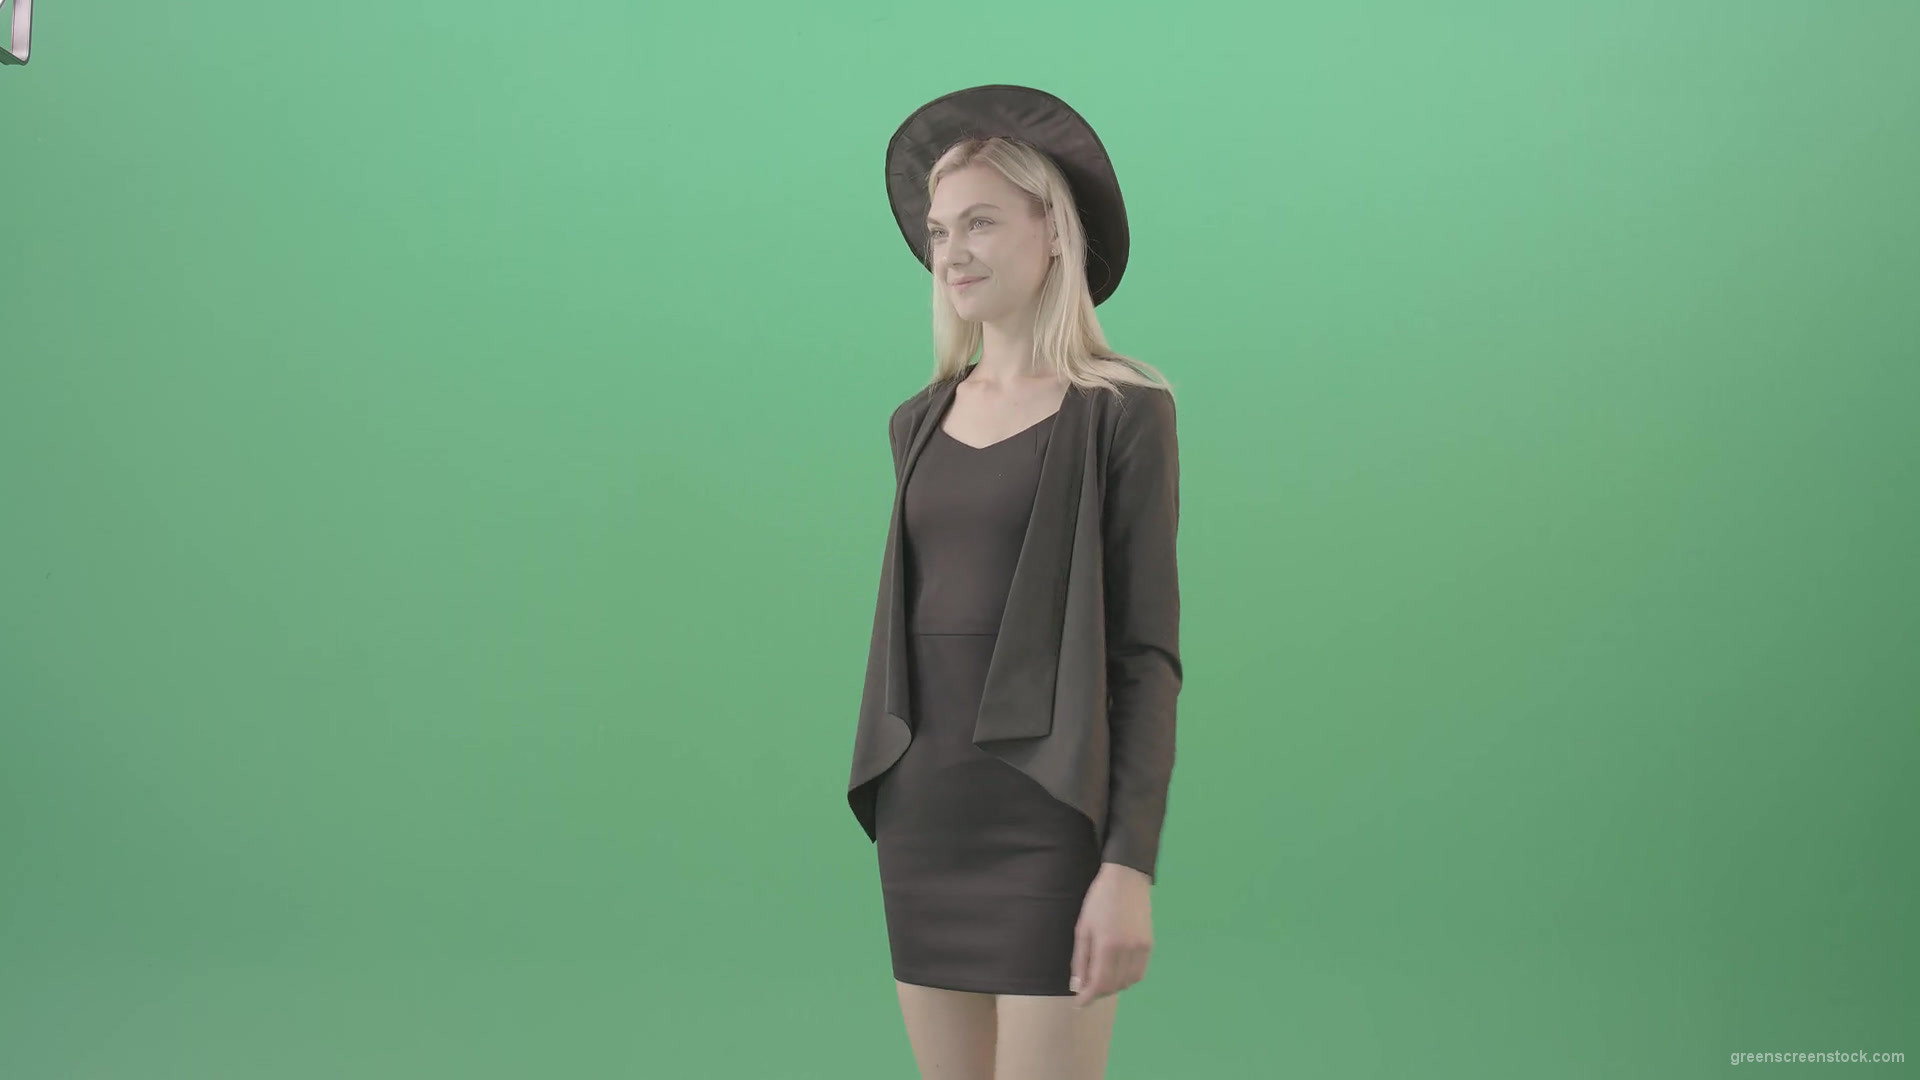 Blonde-Girl-in-Cap-choosing-virtual-products-on-touch-screen-4K-Green-Screen-Video-Footage-1920_009 Green Screen Stock